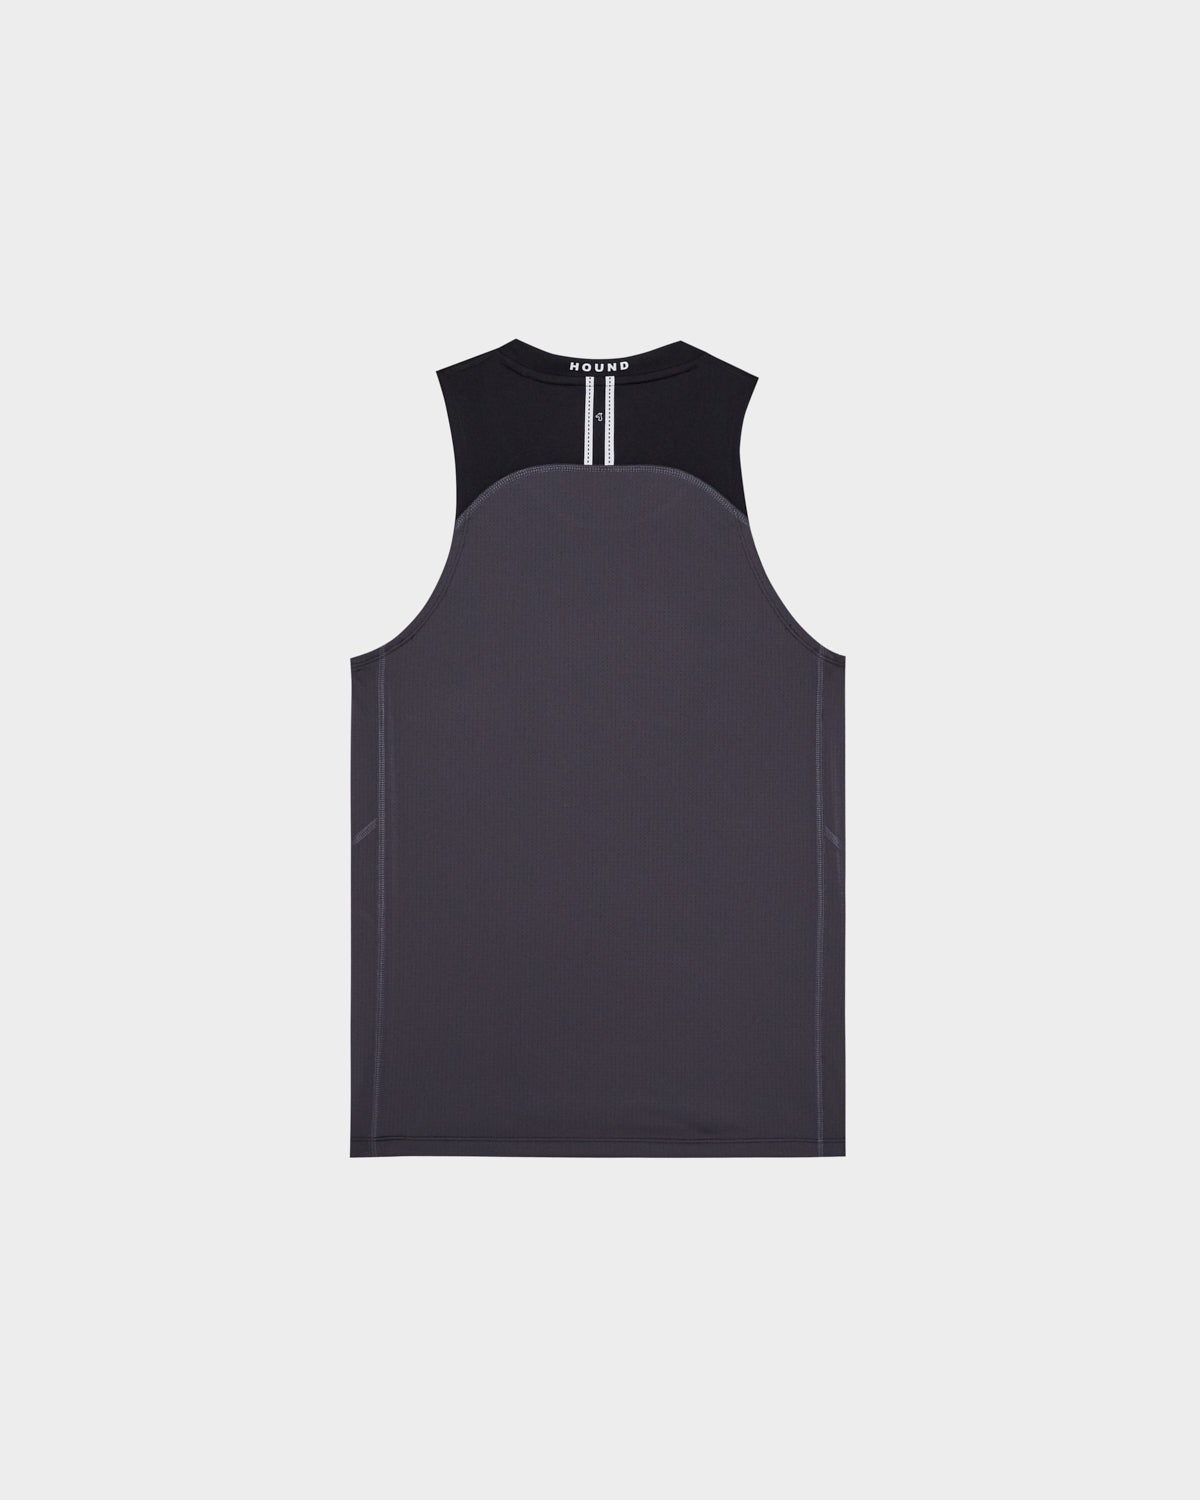 BREATHABLE JERSEY  TANK-TOP  WITH  SIGNATURE LOGO PRINT